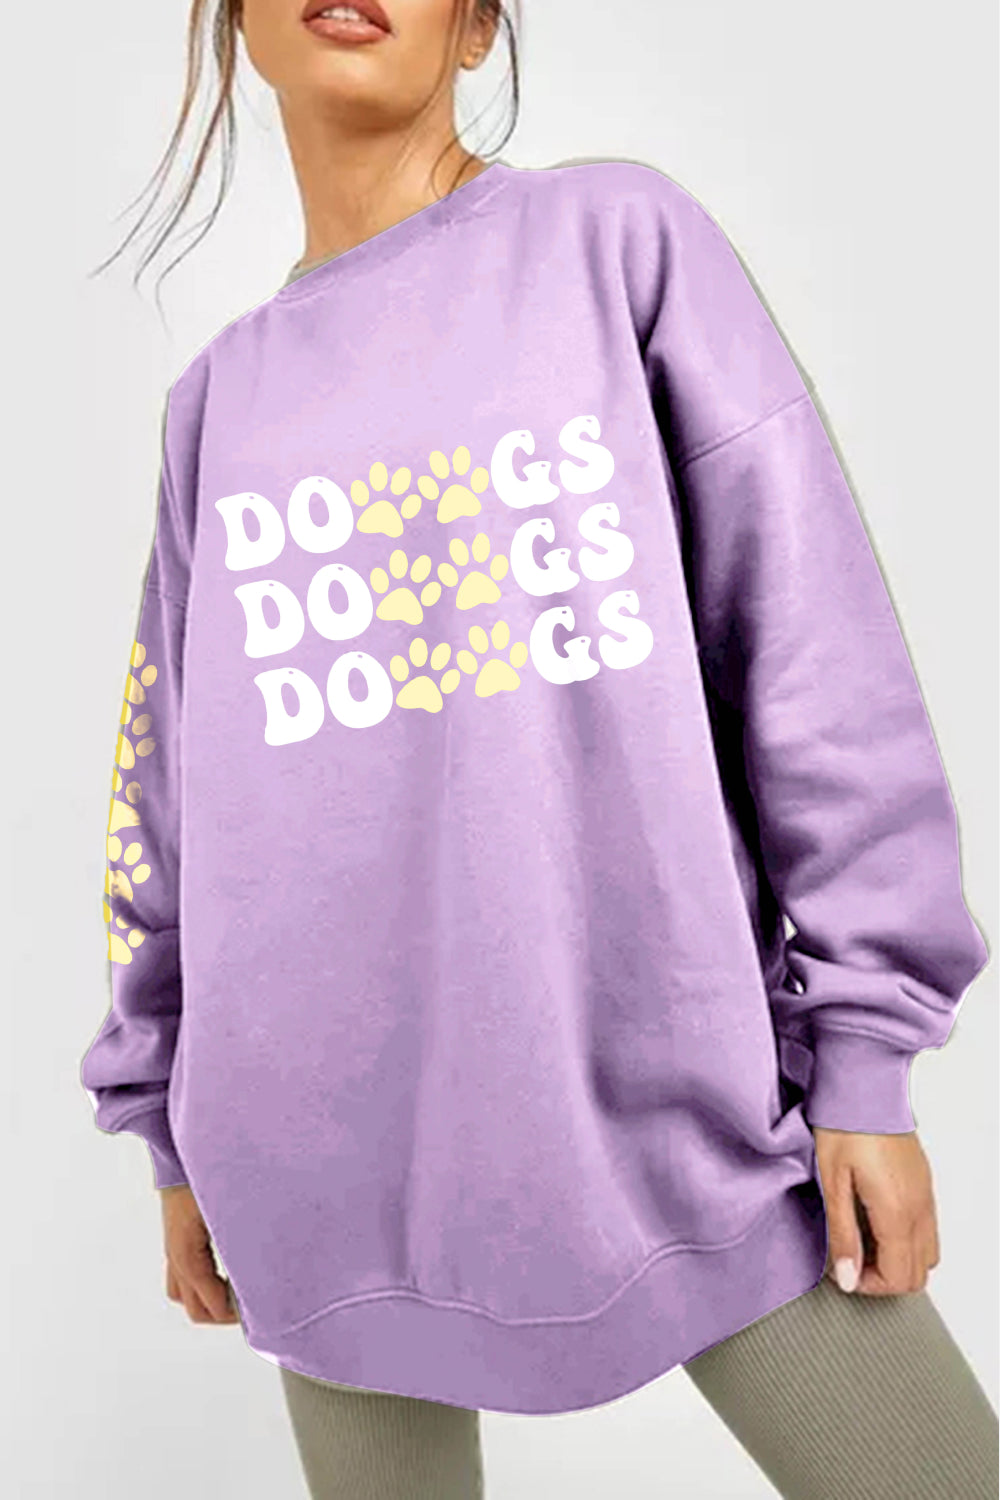 Simply Love Full Size Round Neck Dropped Shoulder DOGS Graphic Sweatshirt